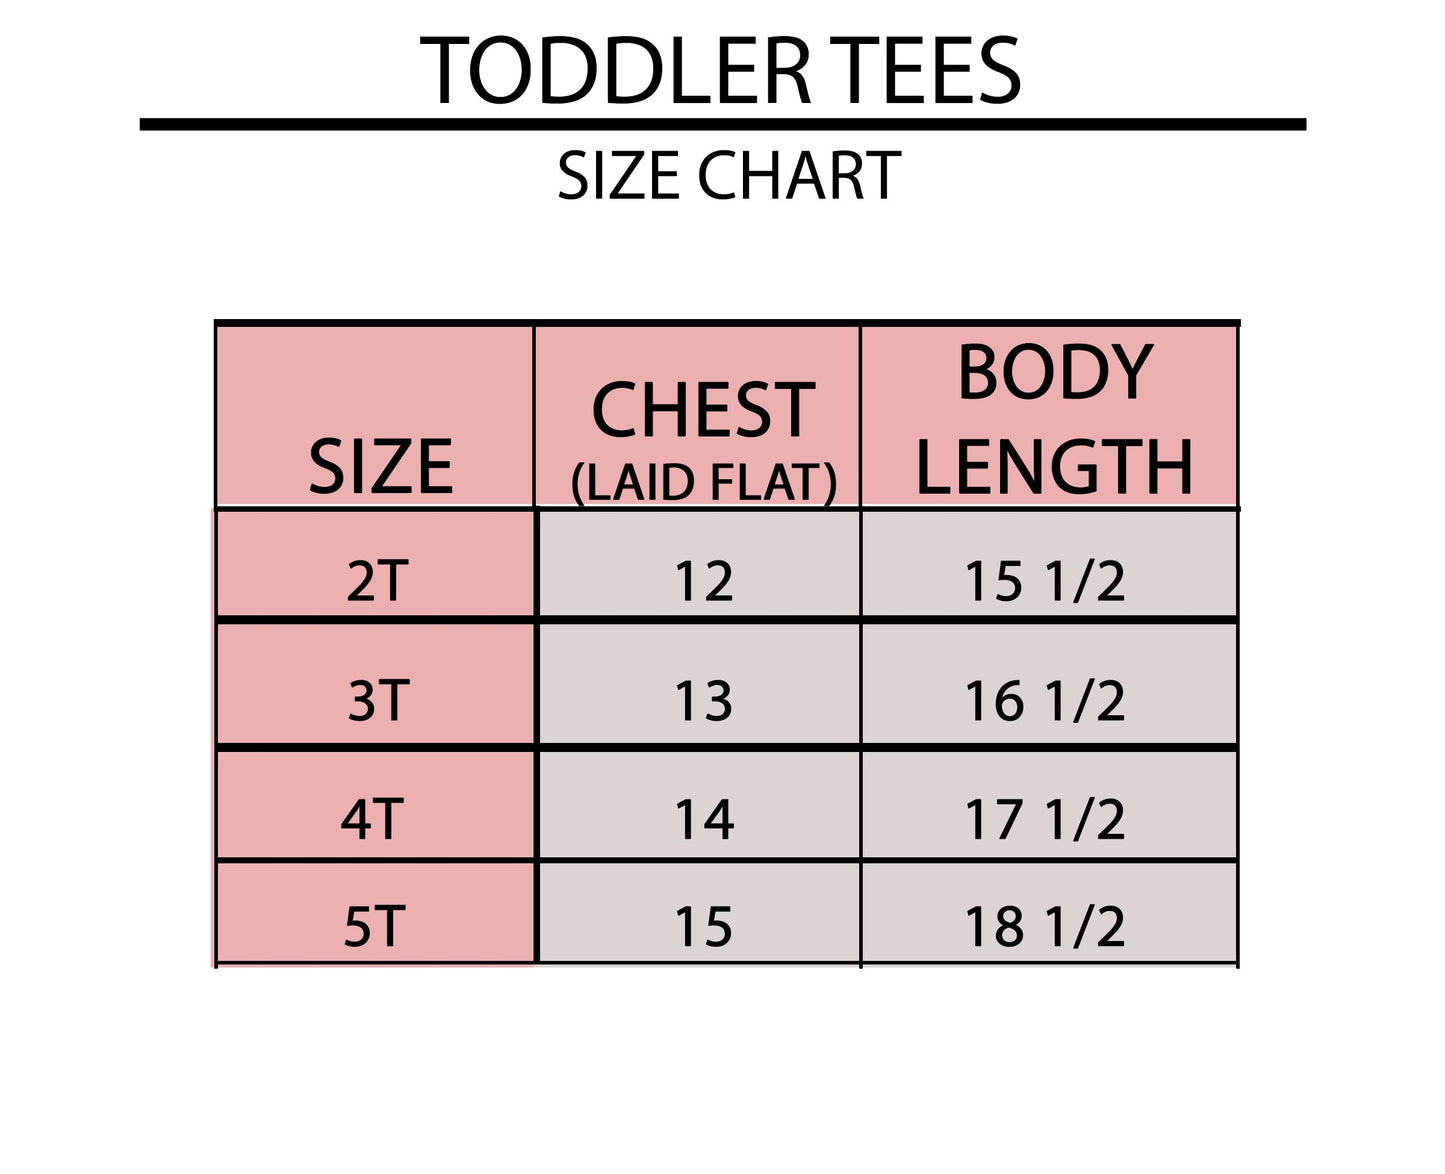 Pinch Proof Lucky Charm | Toddler Short Sleeve Crew Neck